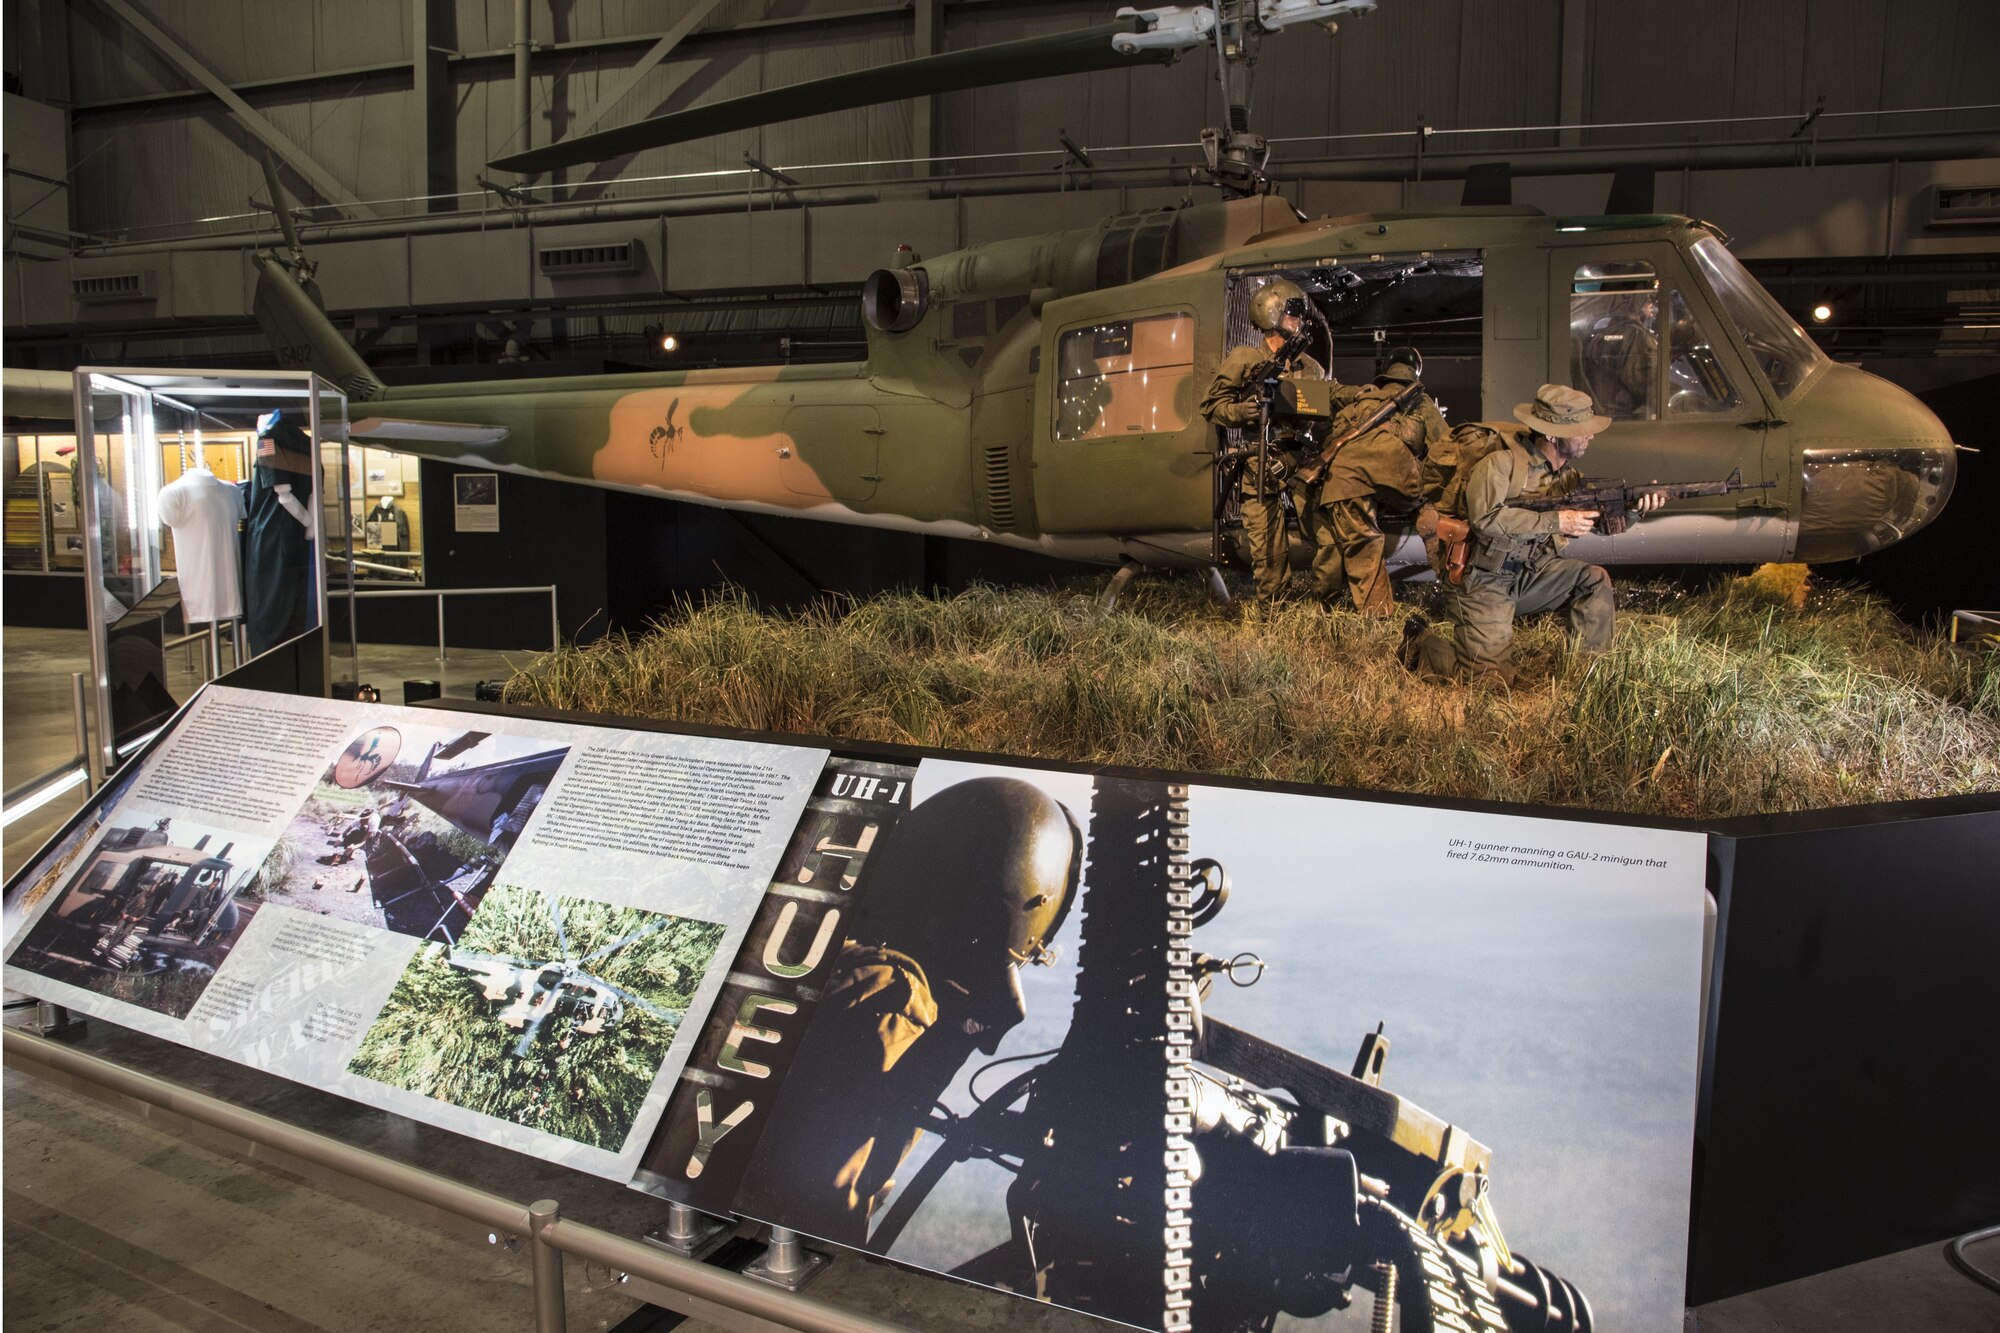 DAYTON, Ohio -- Secret War: Green Hornets, Dust Devils and Blackbirds exhibit on display in the Southeast Asia War Gallery at the National Museum of the United States Air Force. (U.S. Air Force photo by Ken LaRock)